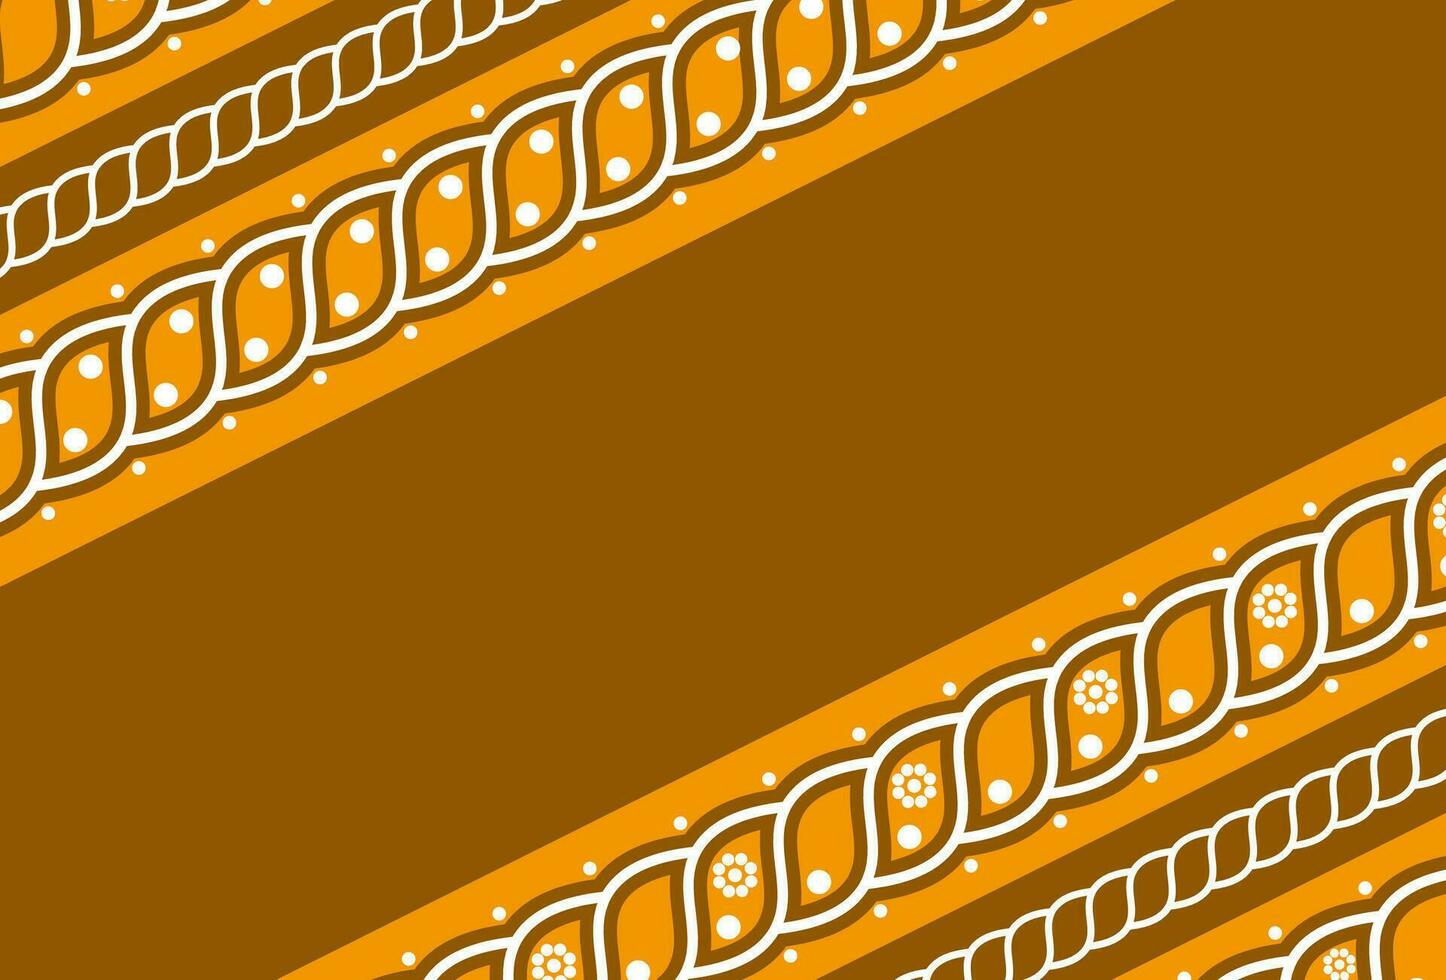 Pattern of patterned batik, brown, white, suitable for background, decoration, pattern, screen printing, motifs, shirts, clothes, printing, paper, cardboard, bags, etc. vector